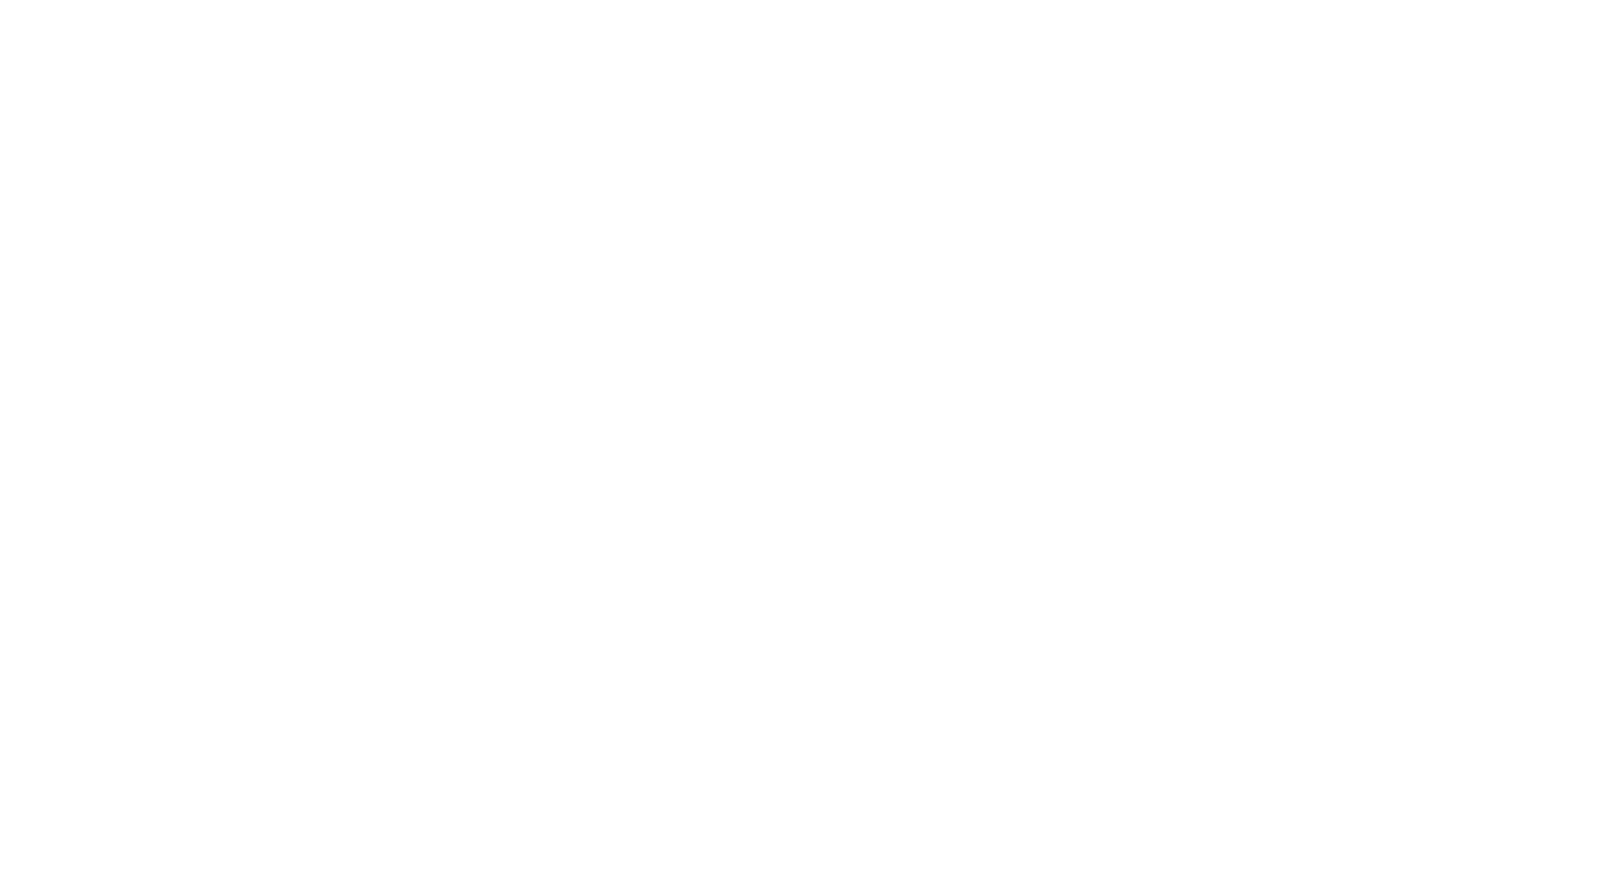 The Red Village